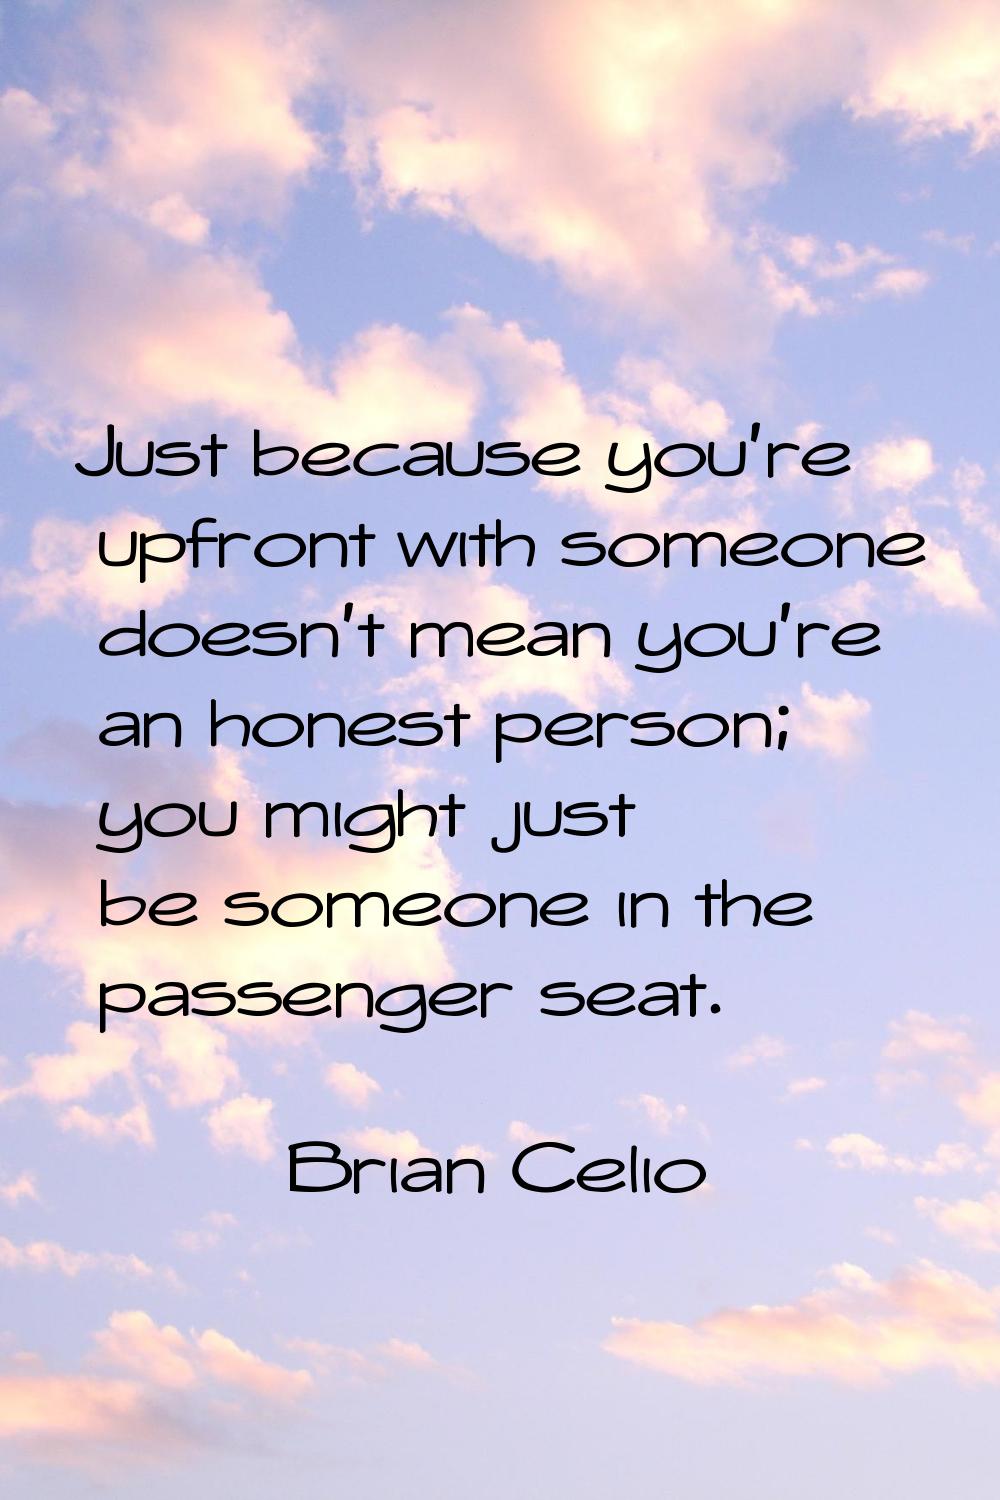 Just because you're upfront with someone doesn't mean you're an honest person; you might just be so